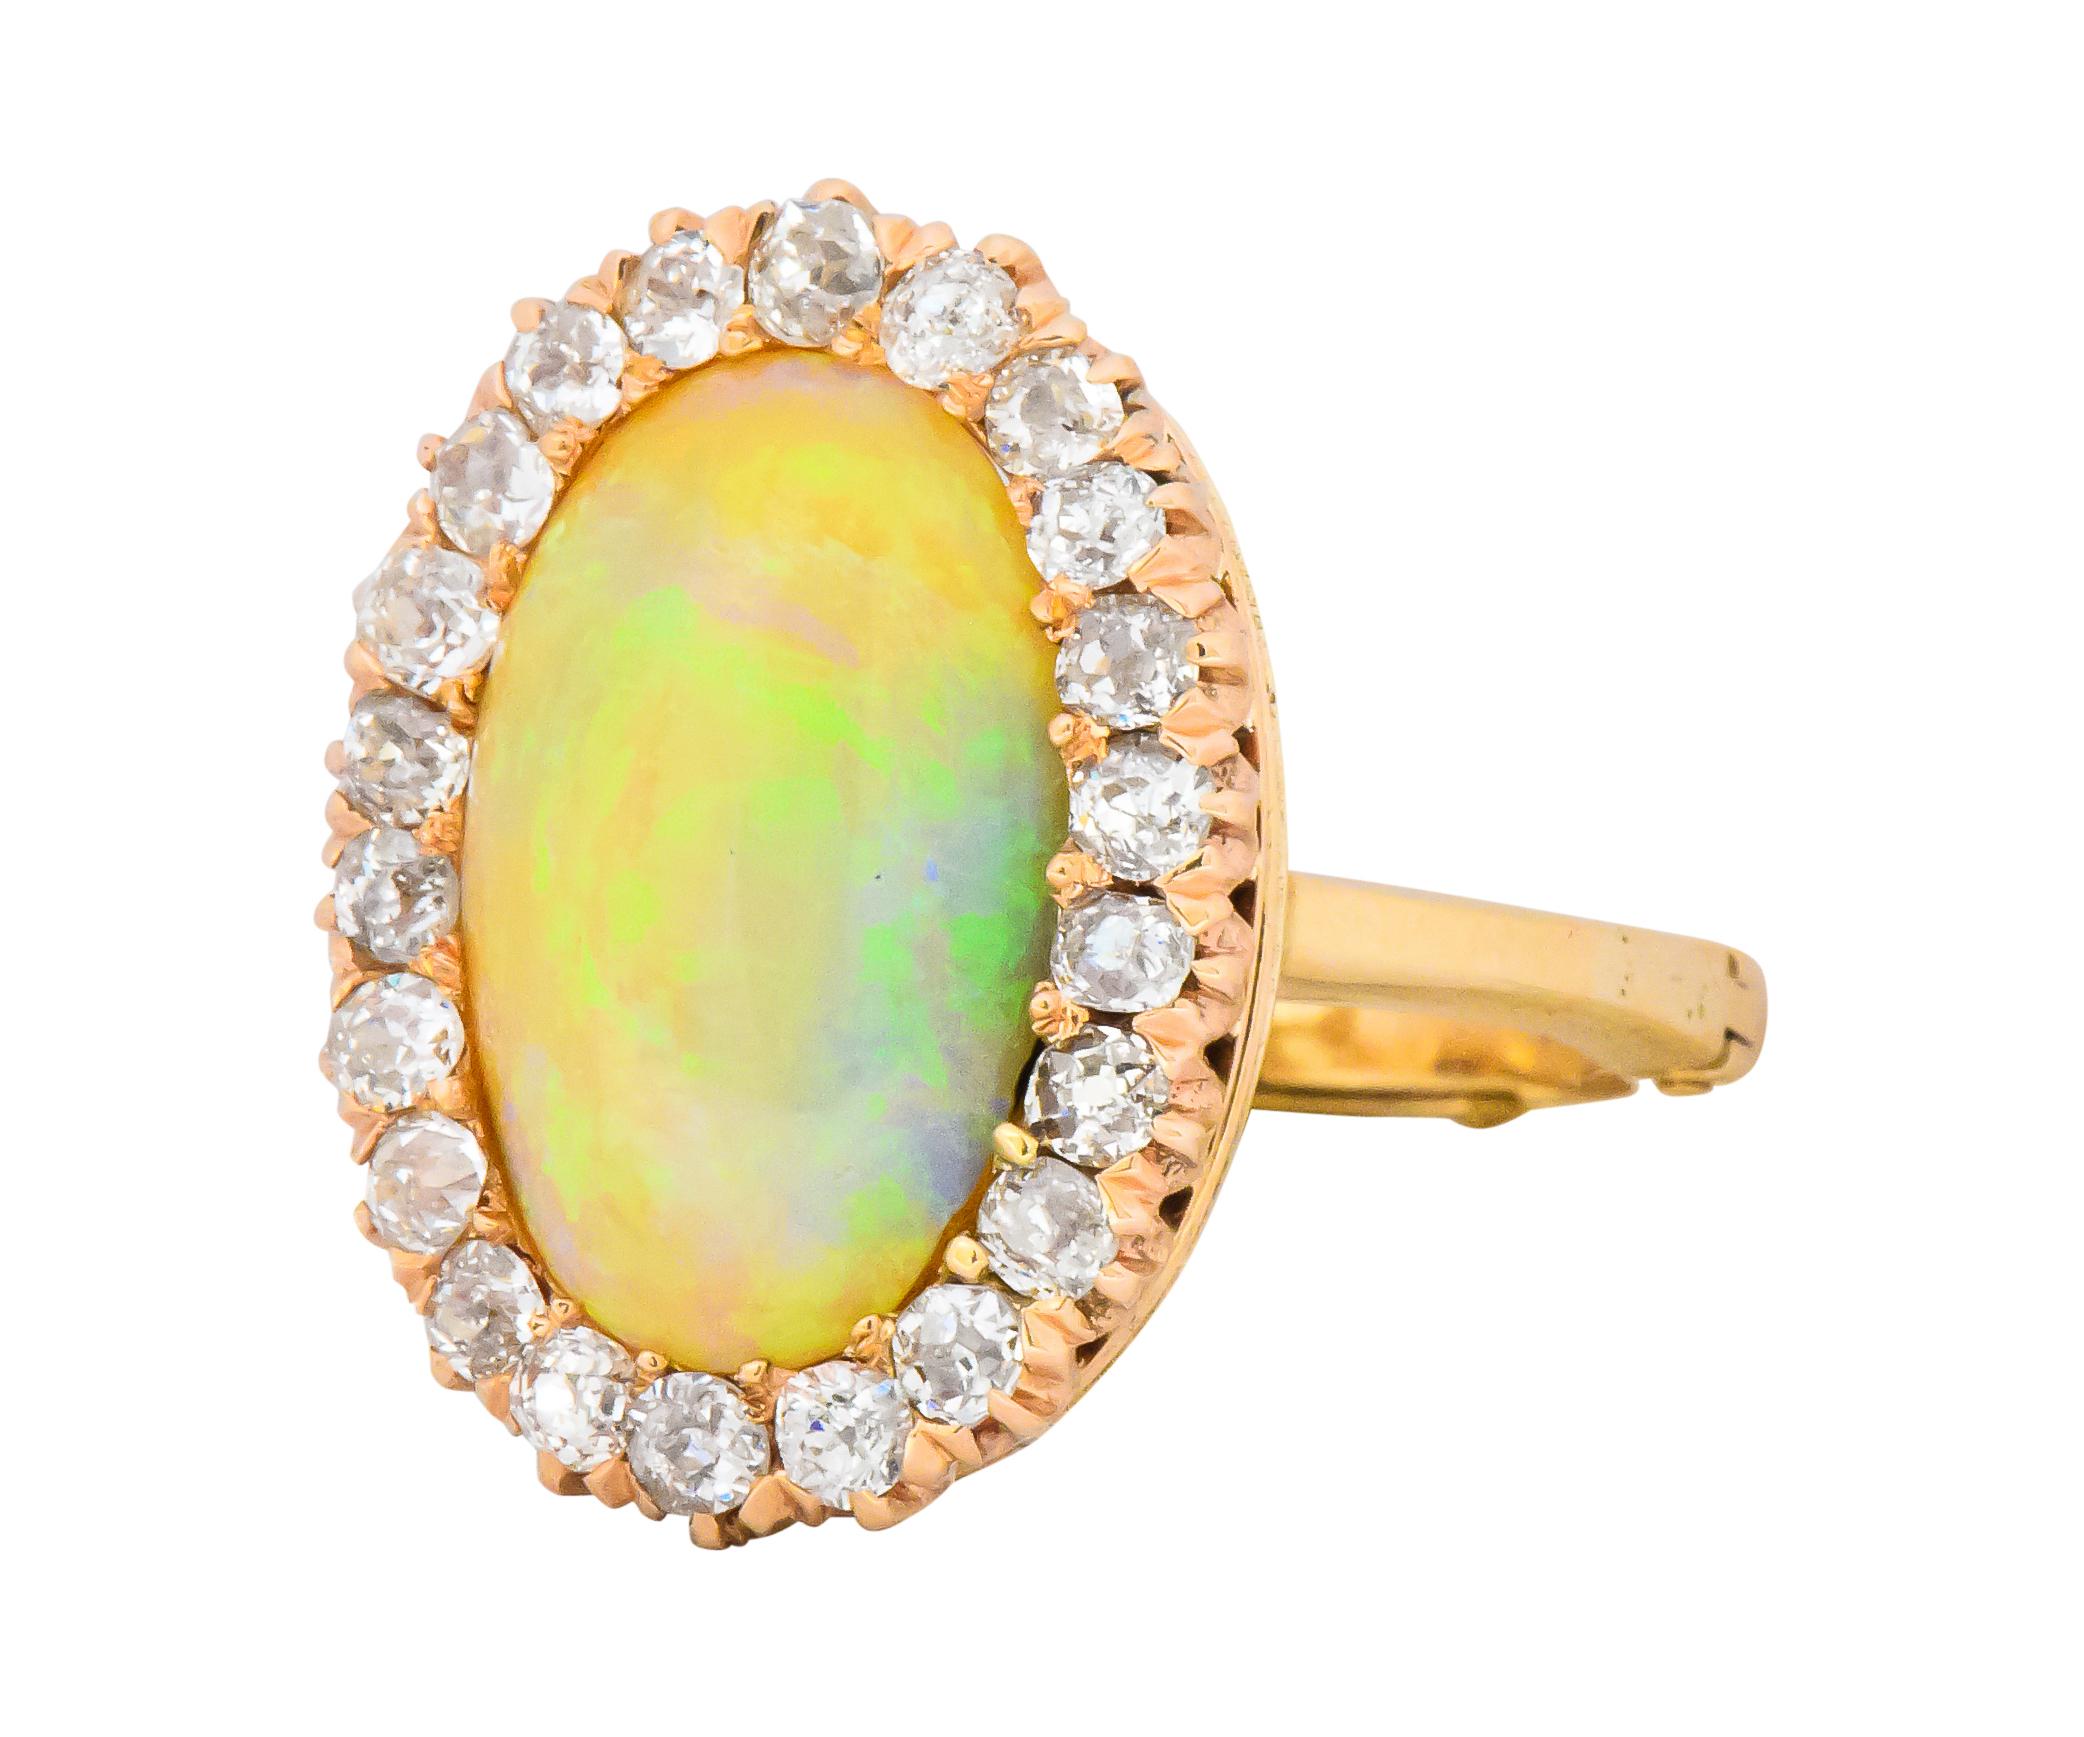 Centering a white opal measuring approximately 15.5 x 9.8 mm with good play-of-color that contains green and yellow with a bit of violet

Set within an old mine and old European cut diamond surround, with 22 diamonds weighing approximately 0.65